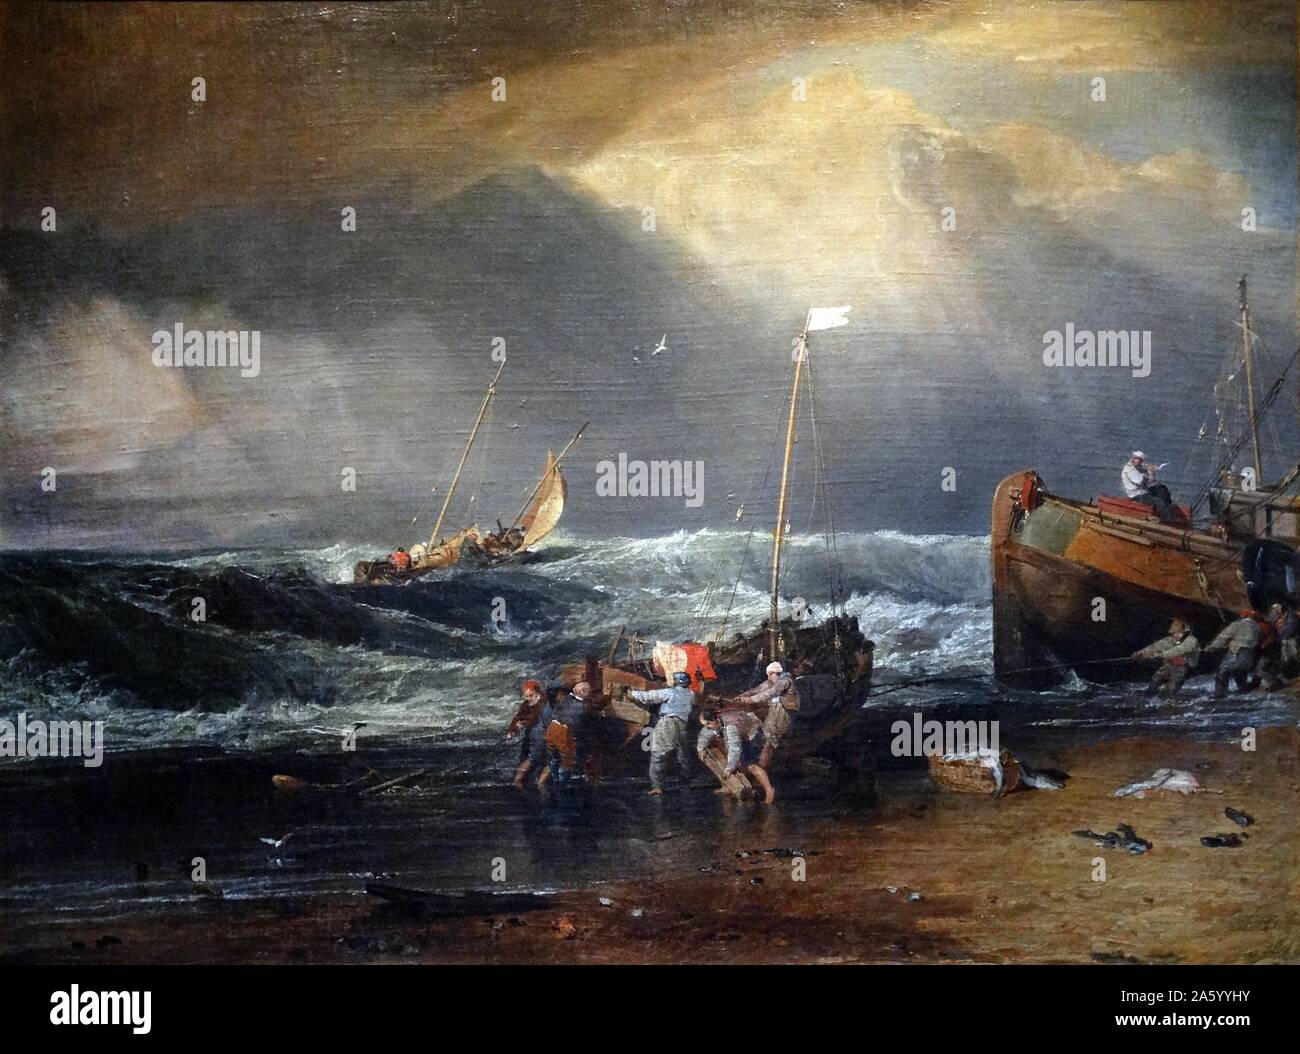 Painting titled 'Coast Scene with Fishermen' by Joseph Mallord William Turner (1775-1851) English Romanticist landscape painter. Dated 19th Century Stock Photo